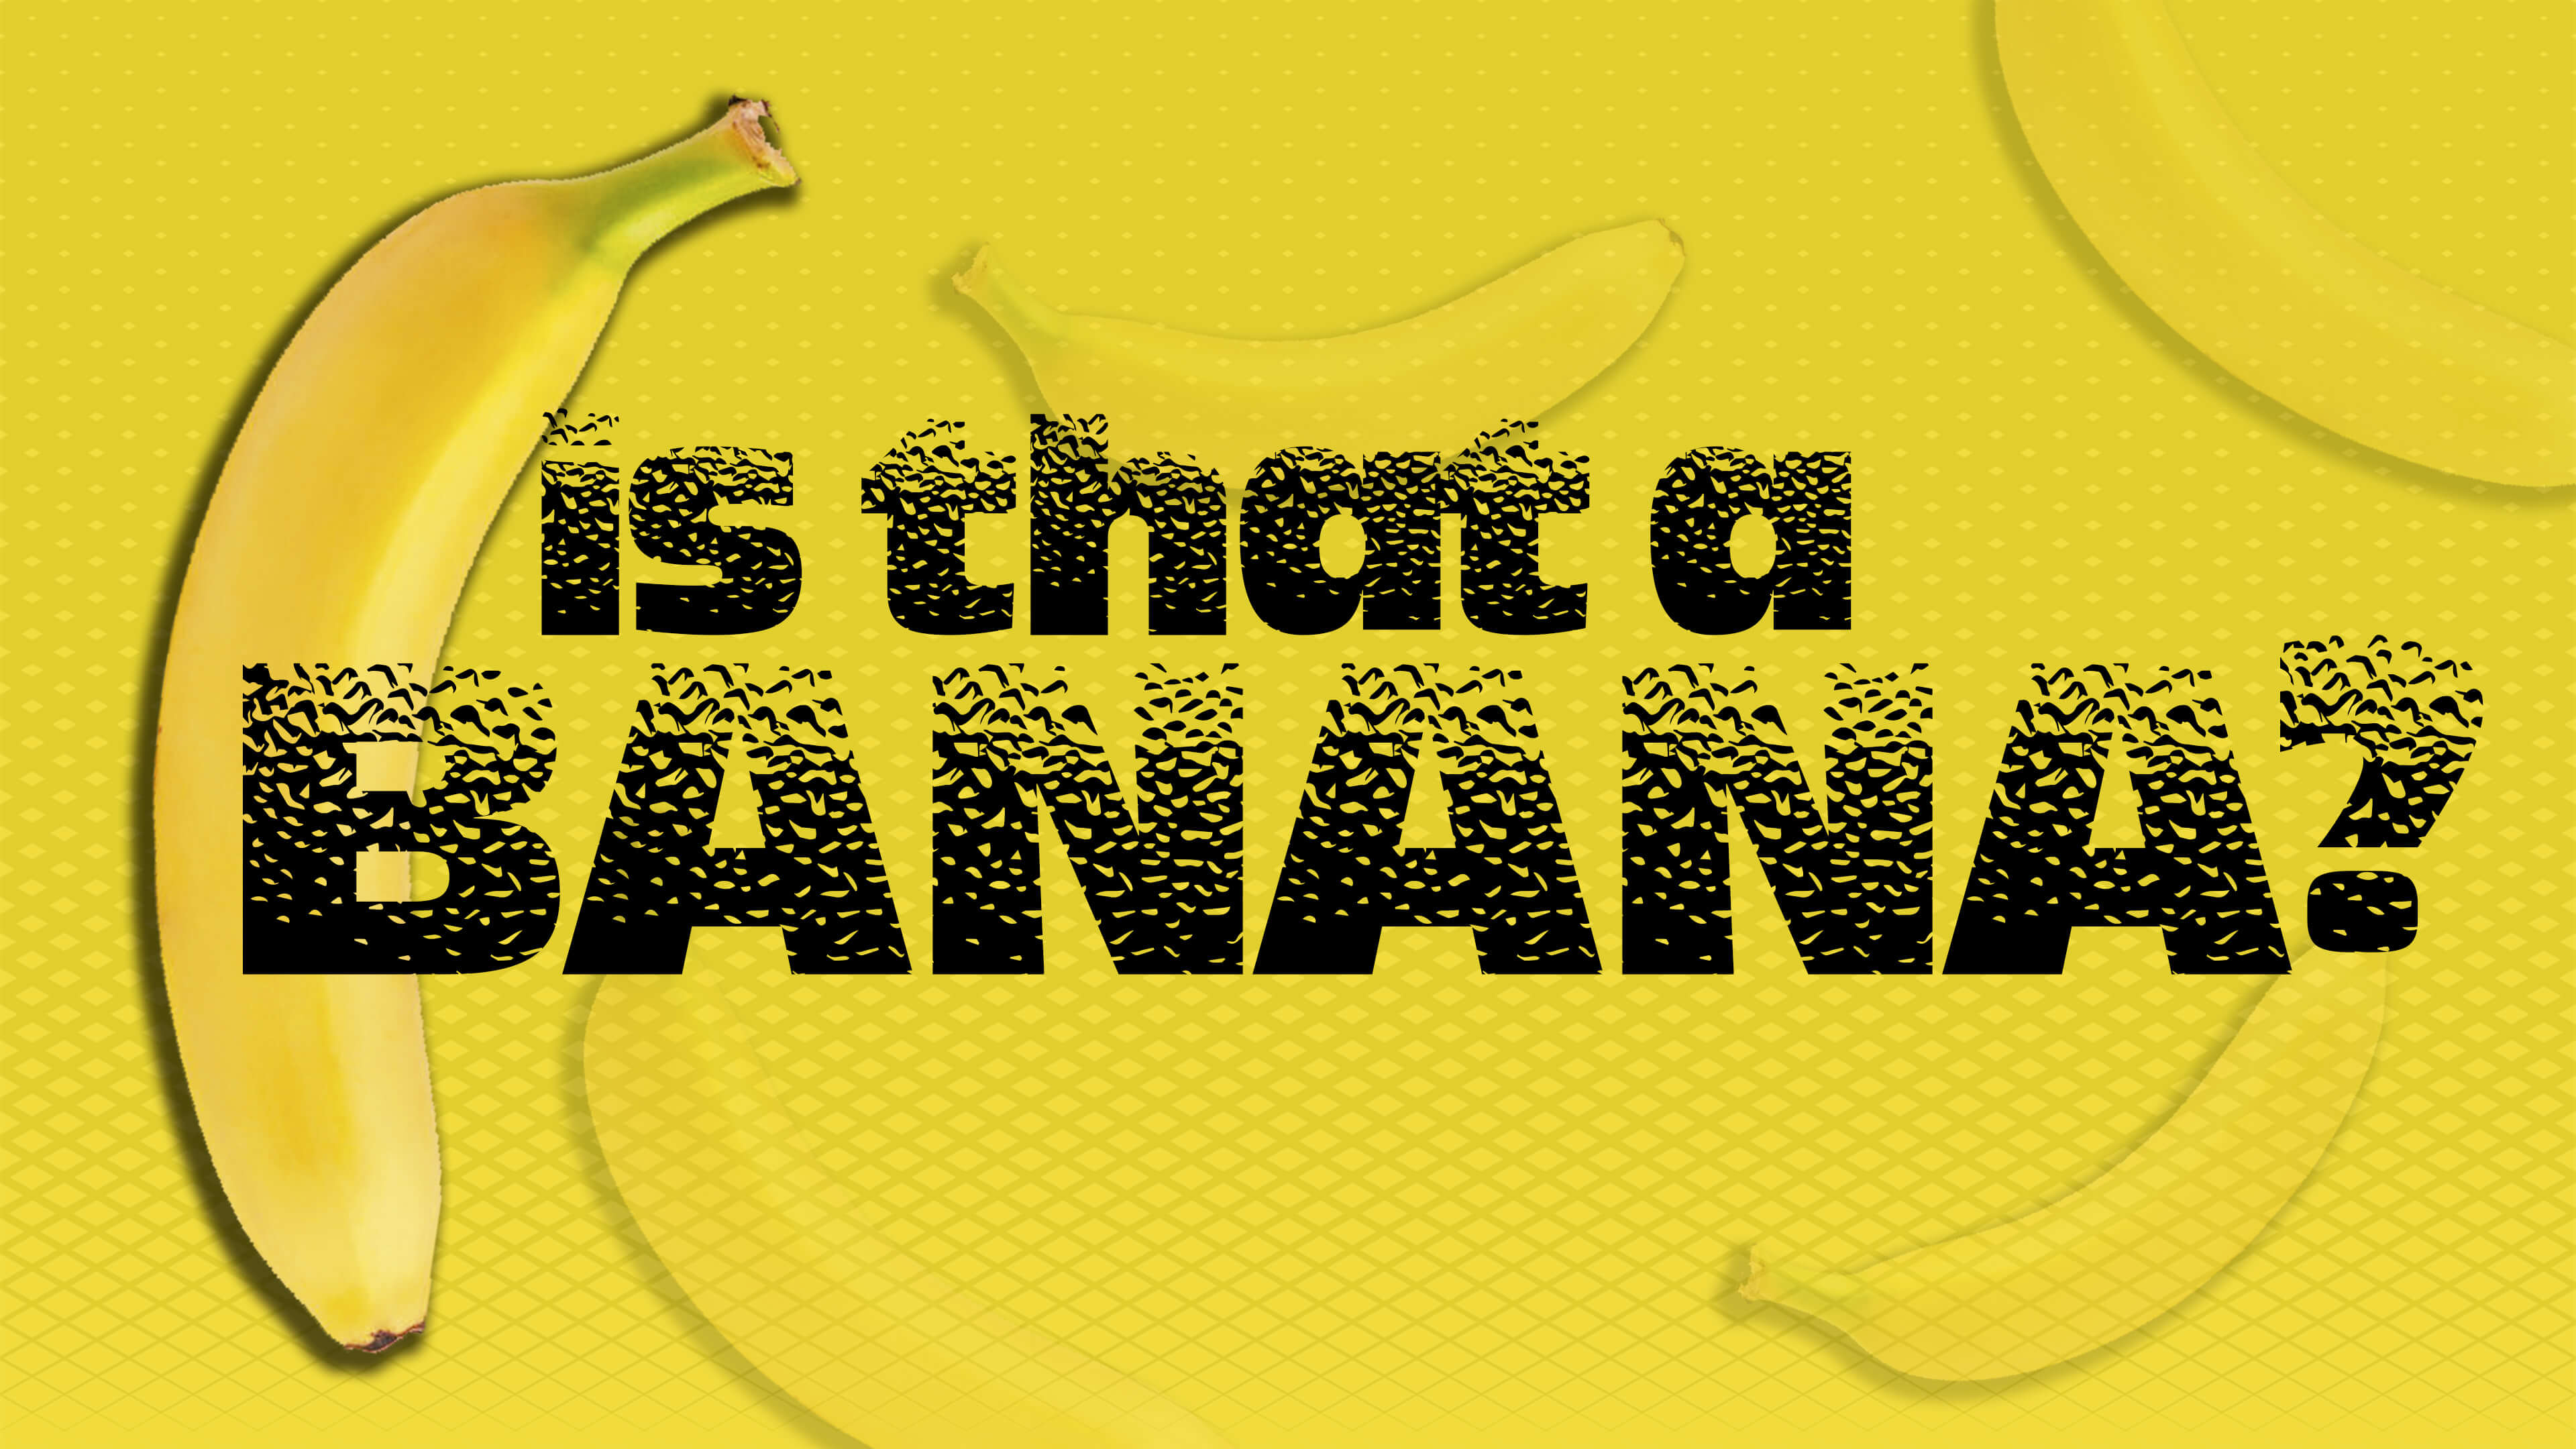 Is That A Banana?